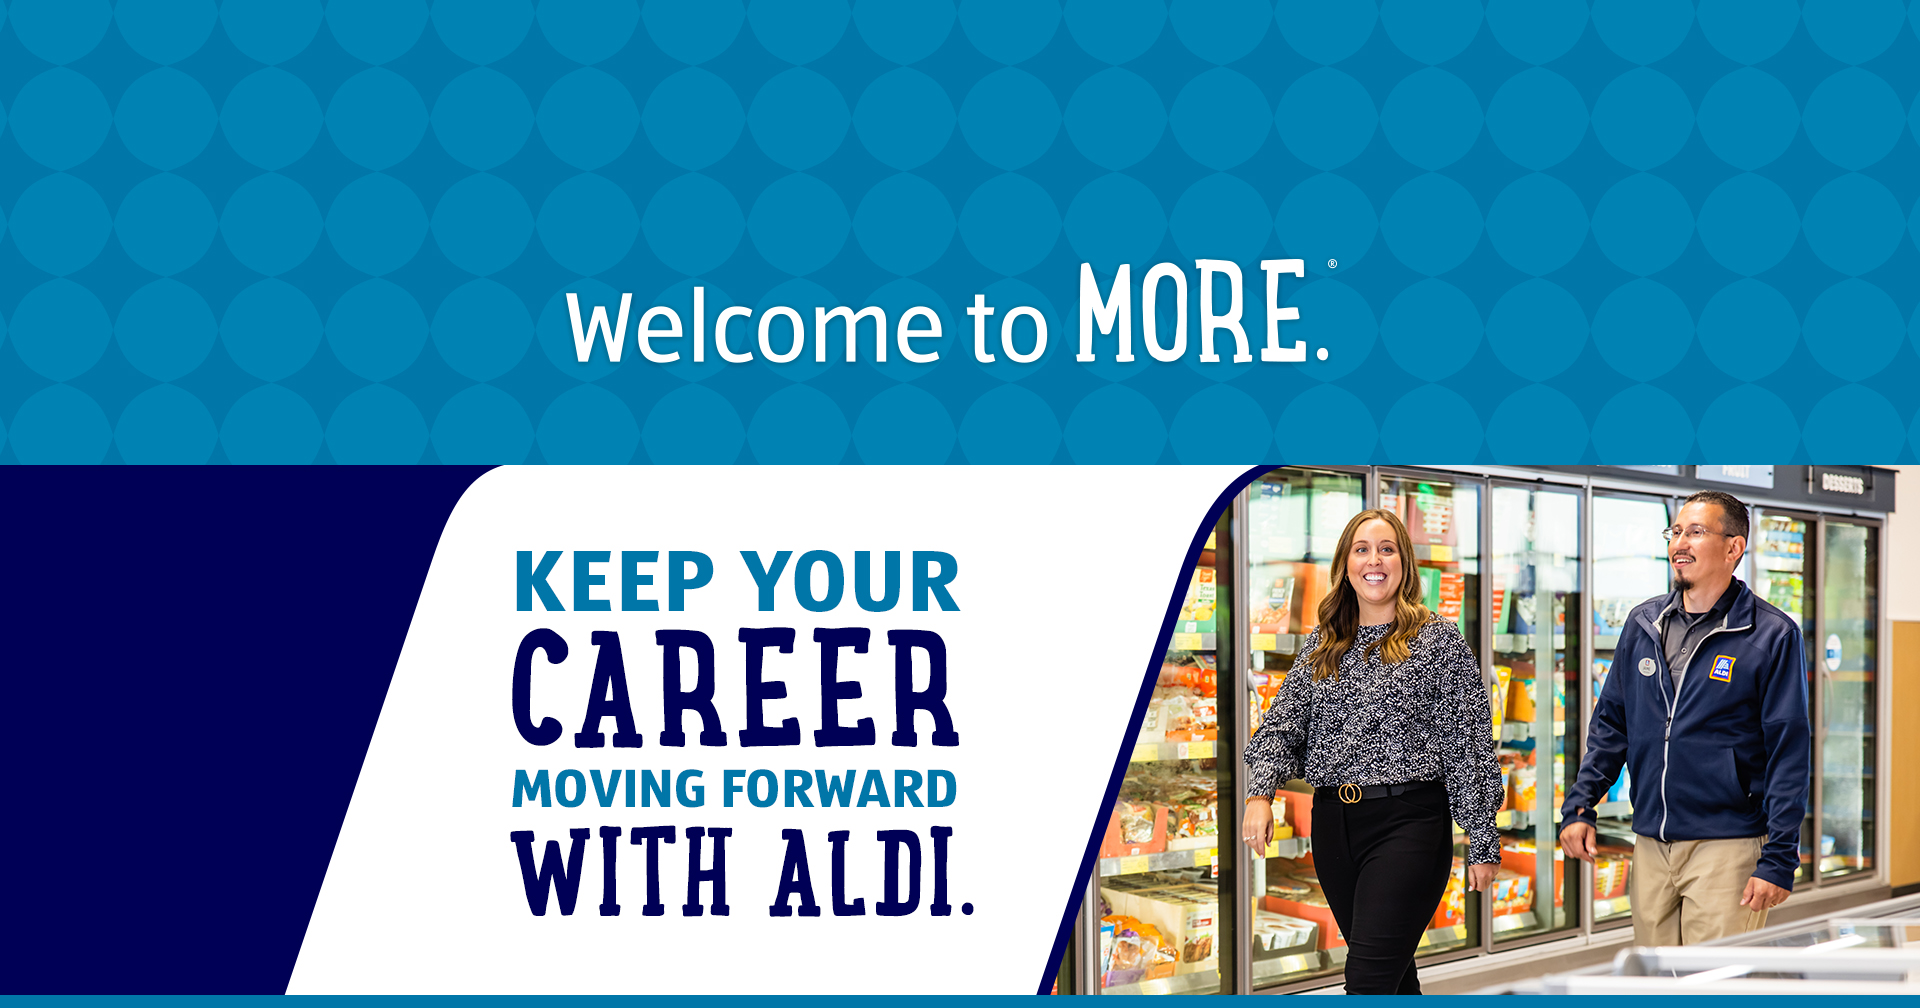 Keep your career moving forward with ALDI.